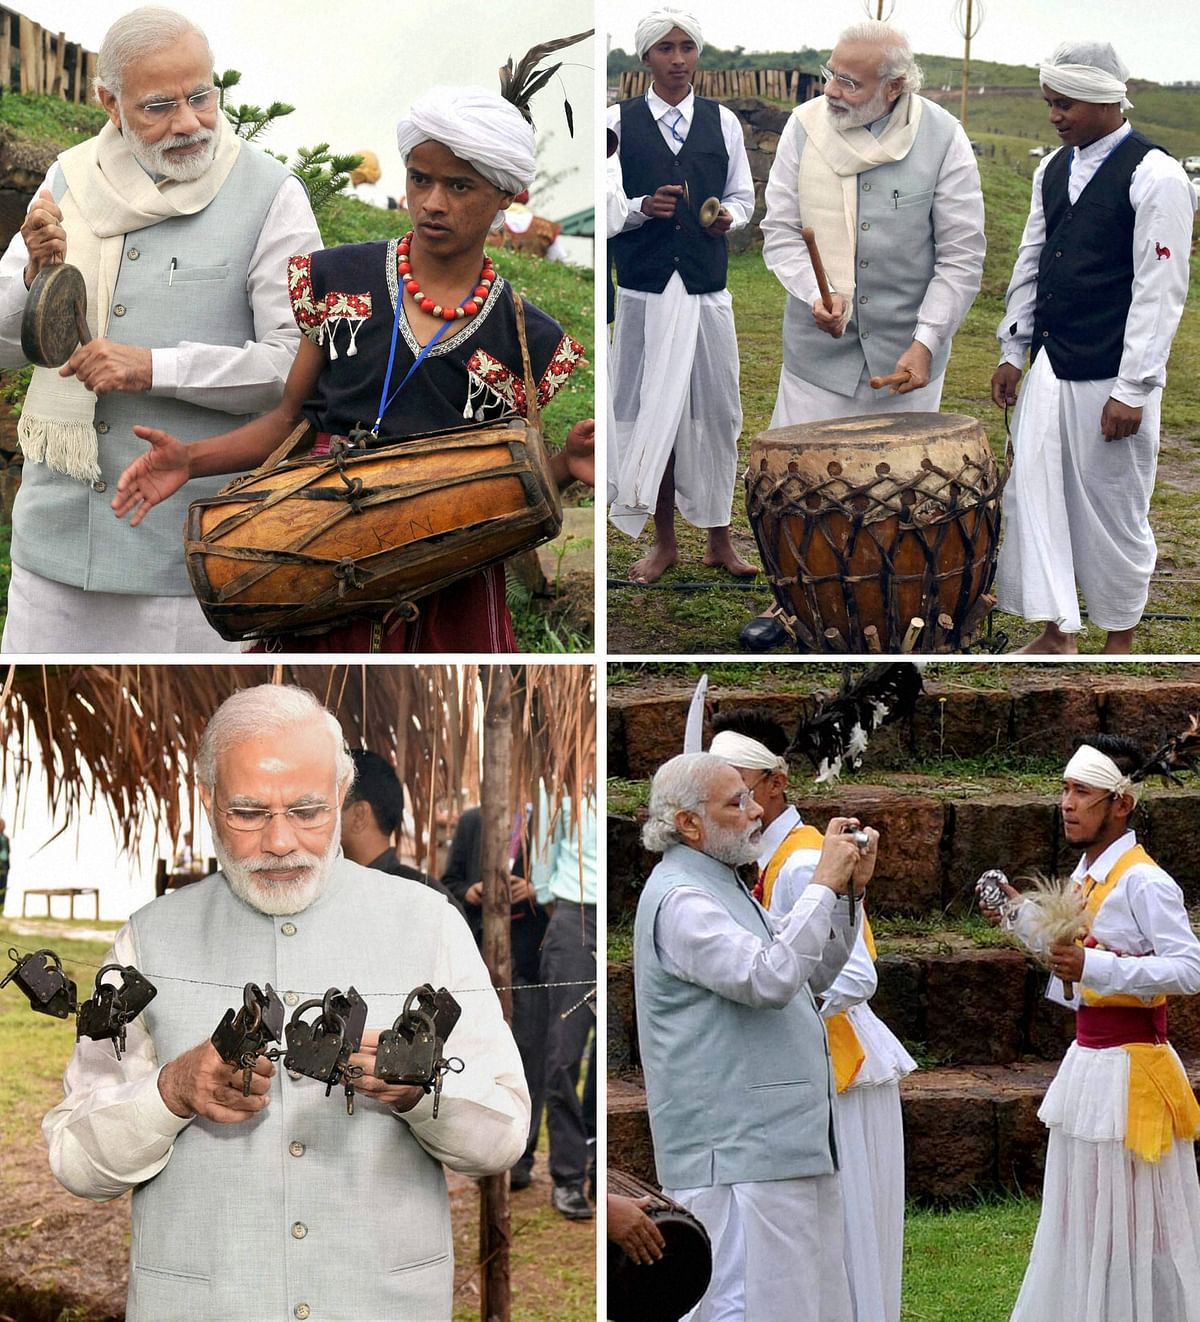 The Prime Minister’s 2-day visit to Meghalaya wound up with him playing the drums with local musicians.